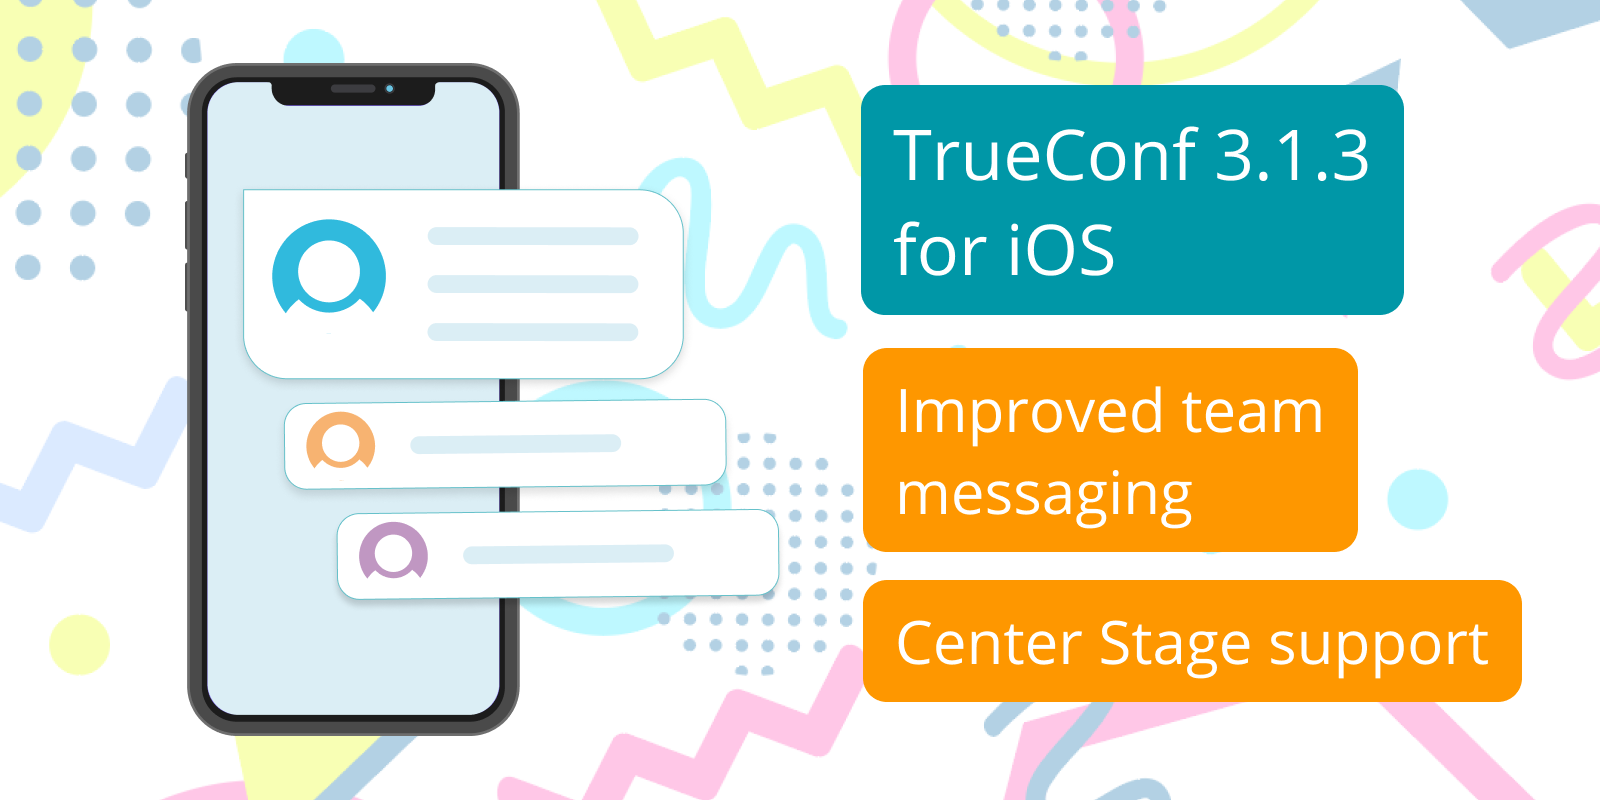 TrueConf 3.1.3 for iOS: Improved team messaging and Center Stage support 1